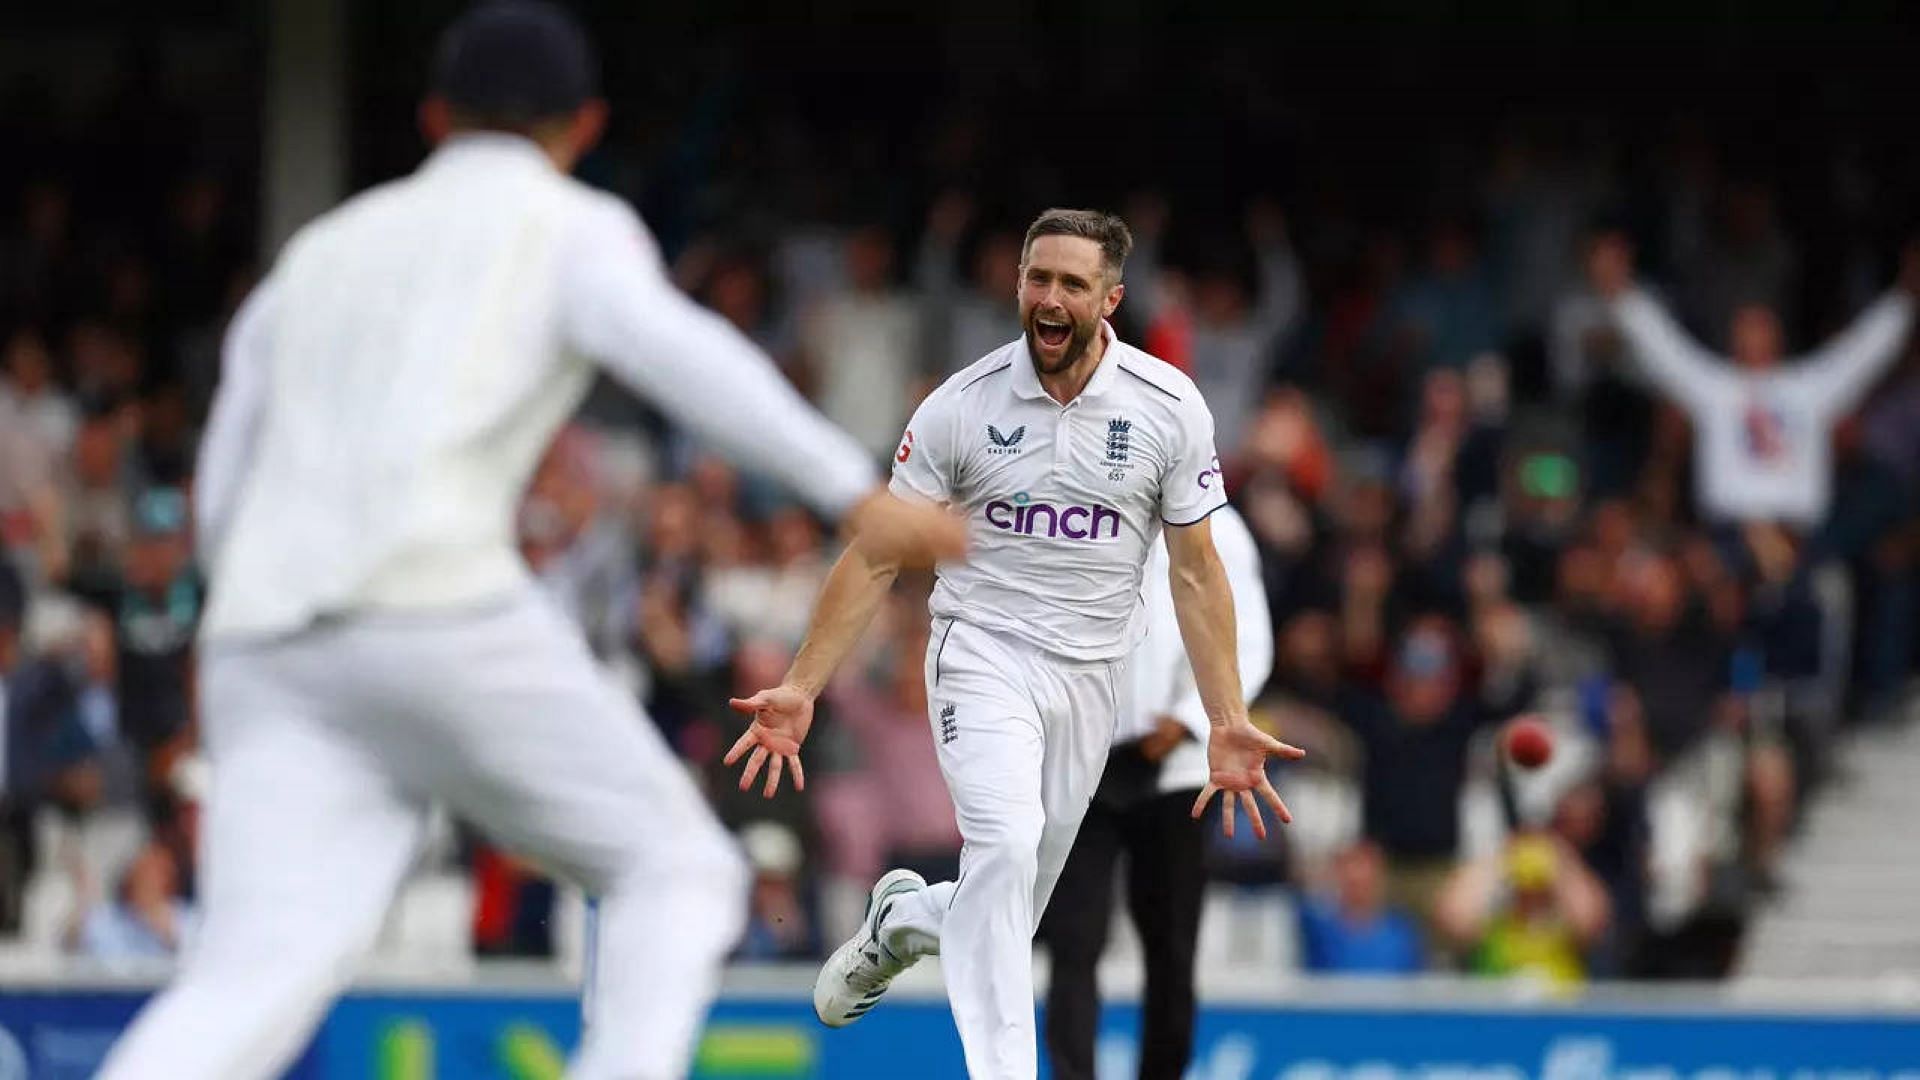 Woakes was the Player of the Series despite playing only three of the five Ashes Tests.